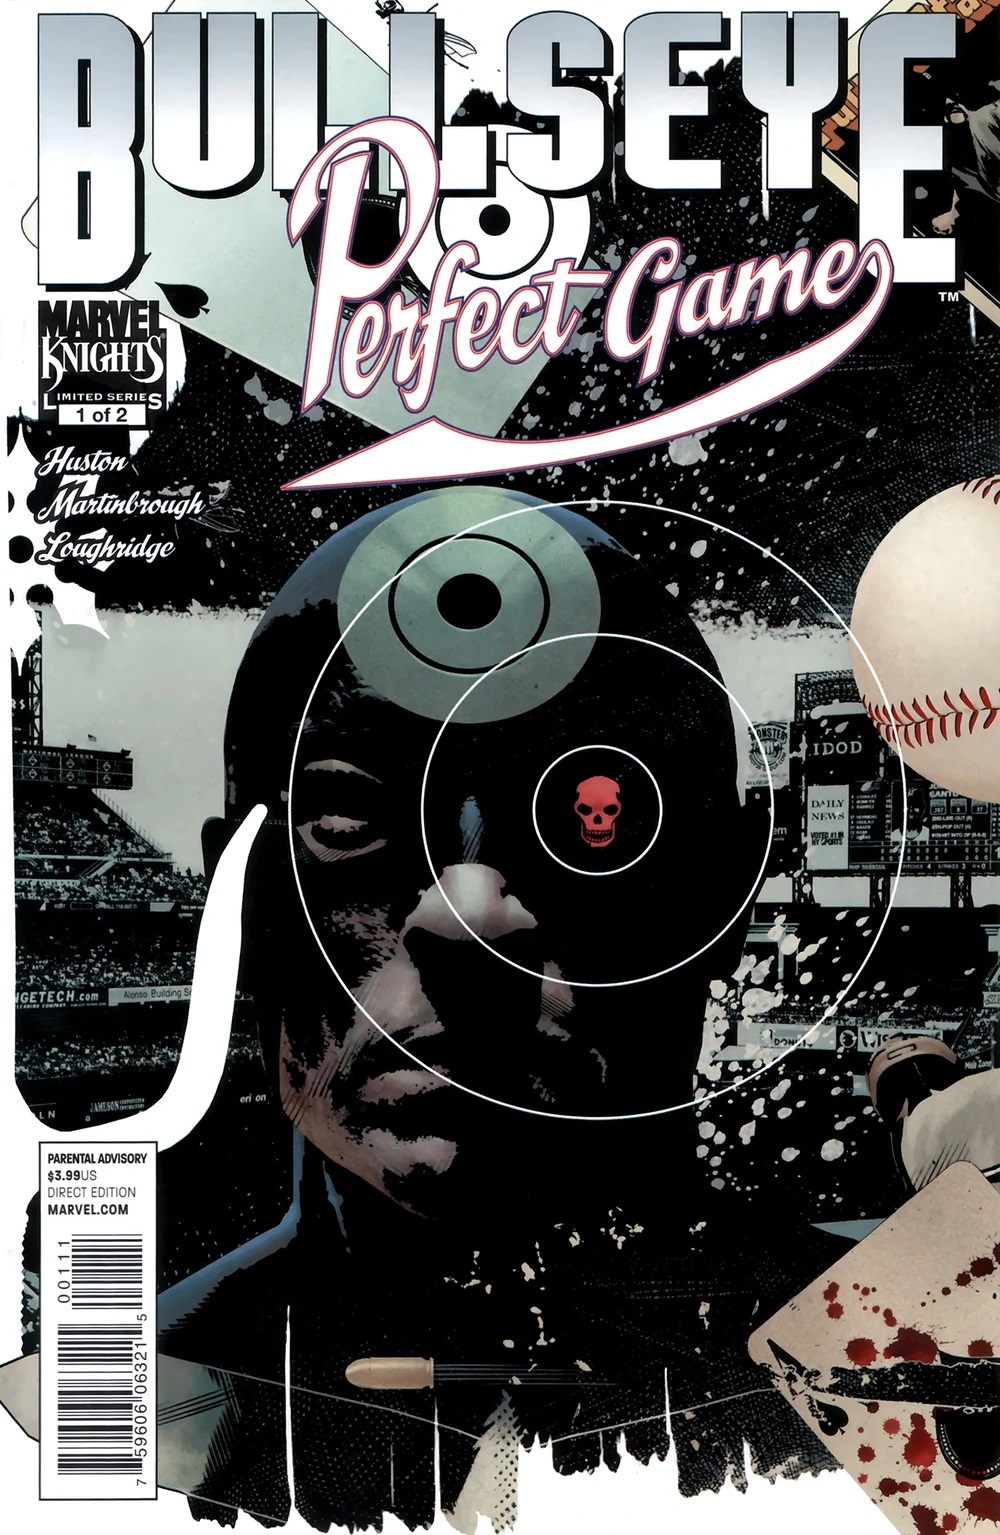 Bullseye: Perfect Game Limited Series Bundle Issues 1-2